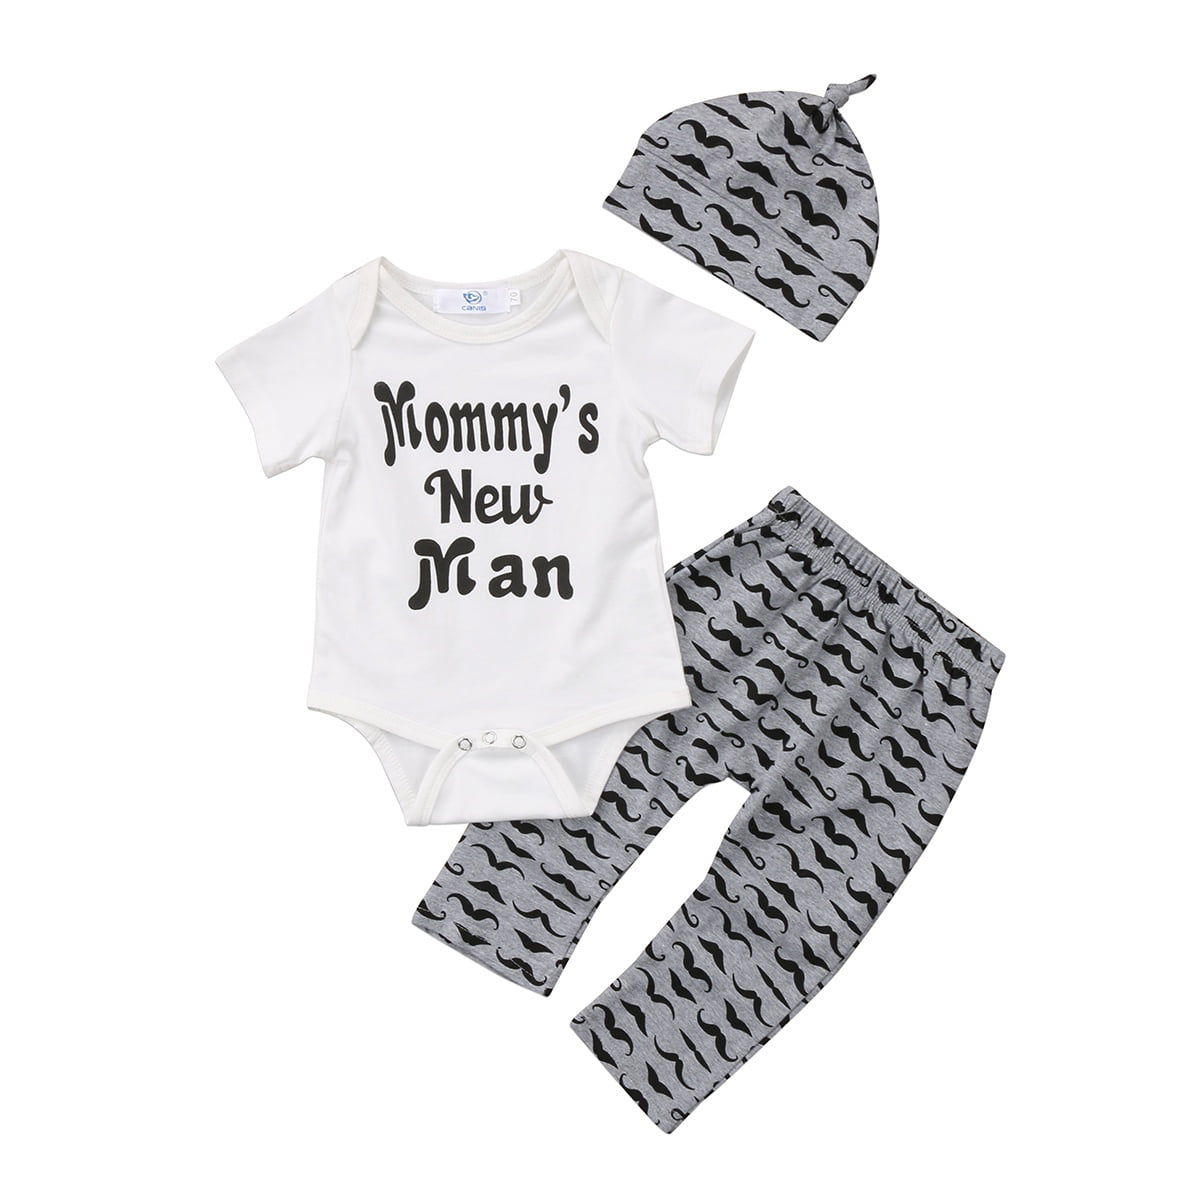 SUNBIBE 3Pcs Cute Baby Boys Outfits Daddys Little Man Long Sleeve Deer Rompers Bodysuit Pants+Hat Outfits Sets 0-34M